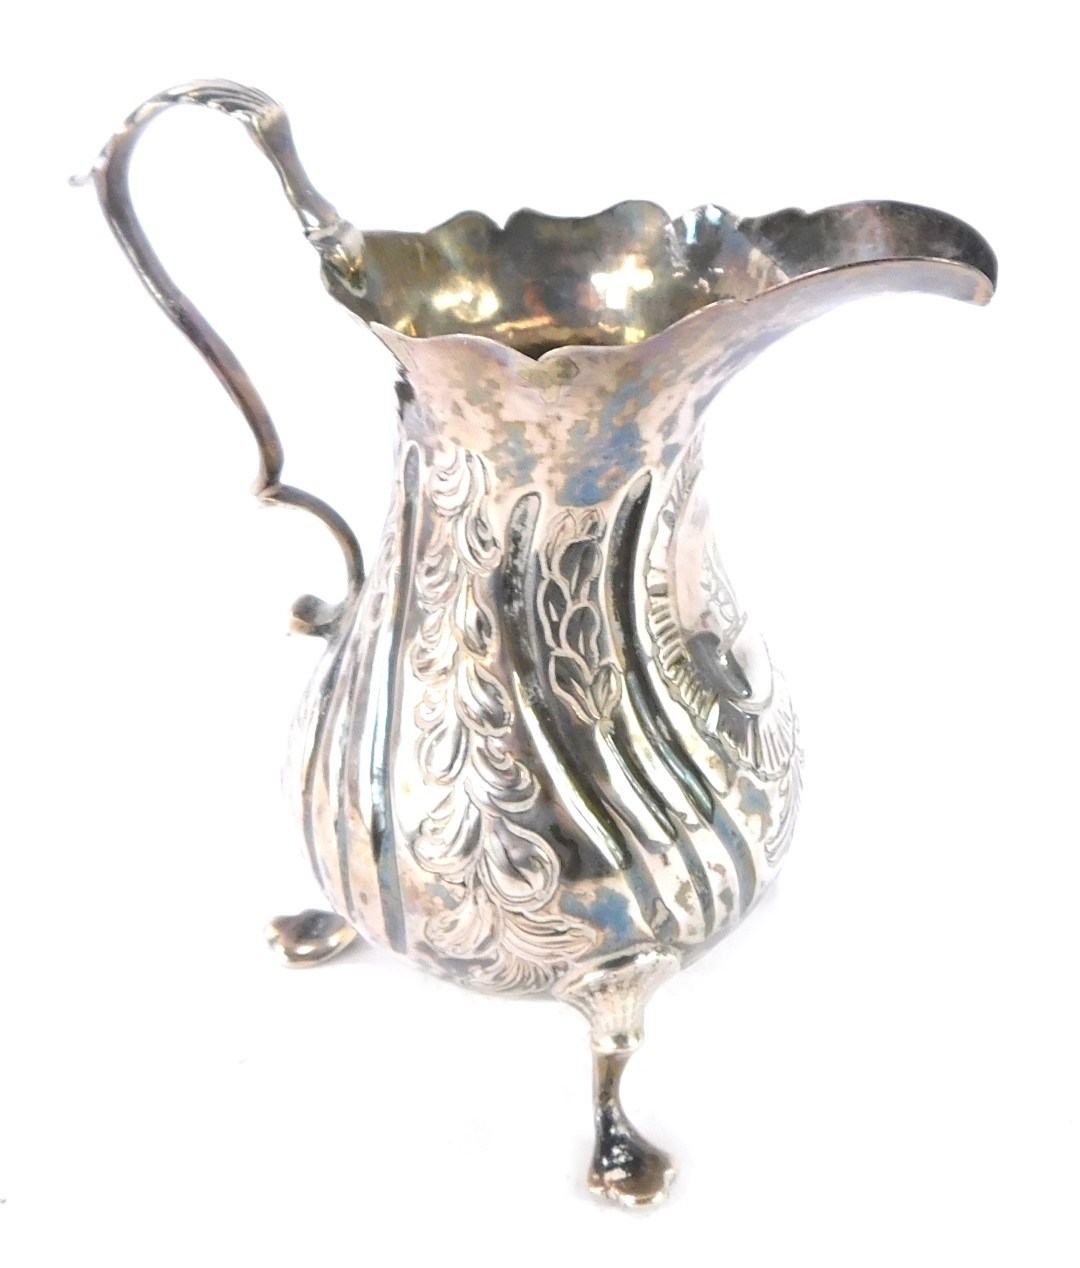 A George III silver cream jug, with embossed rococo floral and foliate decoration, vacant shield